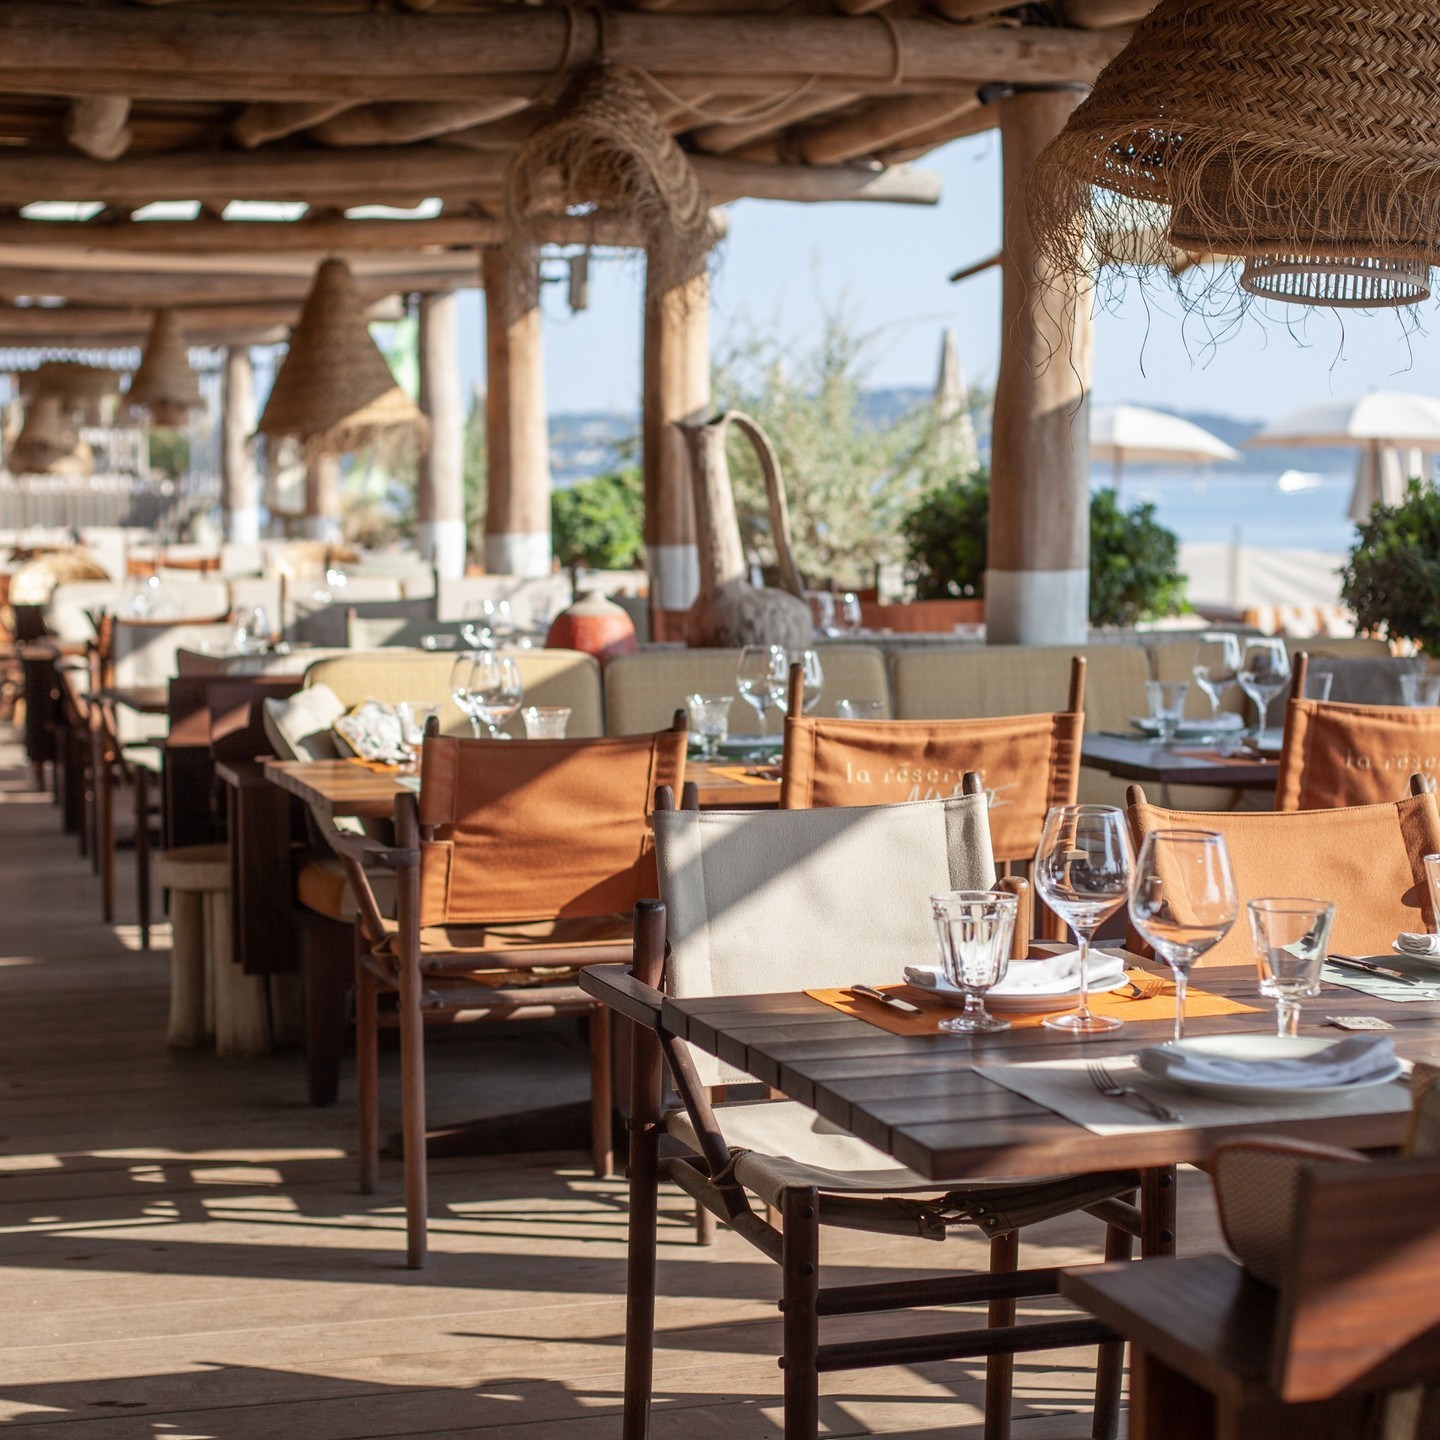 Another sunny day at La Réserve à la Plage - Best Beach Restaurants in Europe